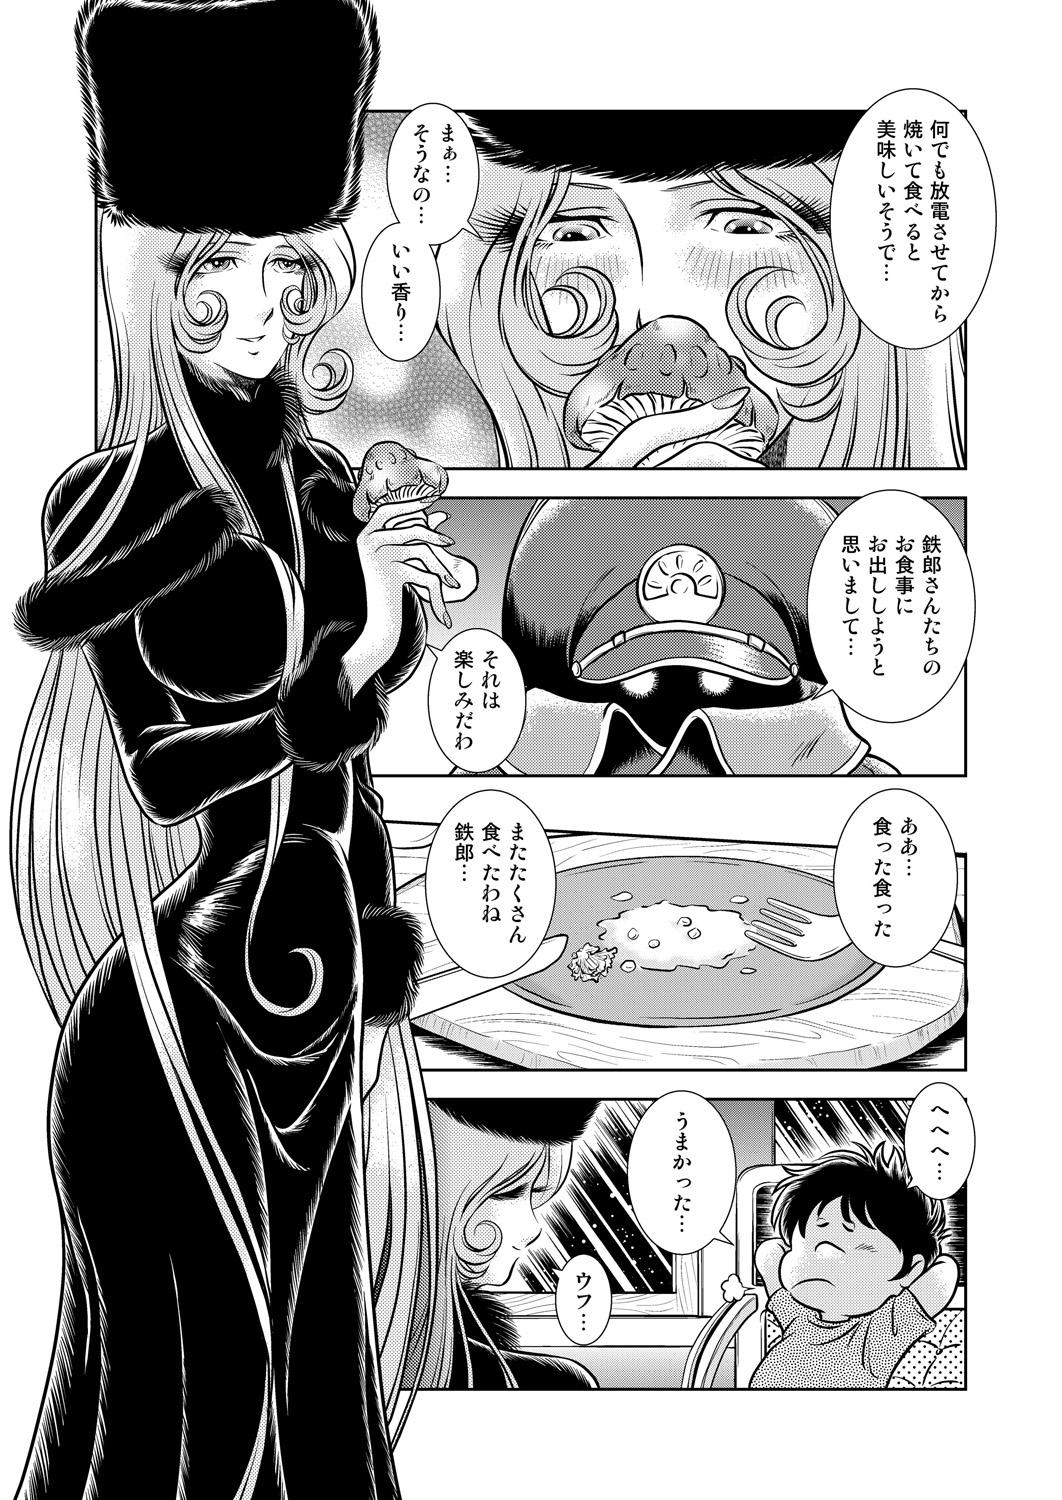 Gay Fetish Maetel Story 9 - Galaxy express 999 Brazzers - Page 7